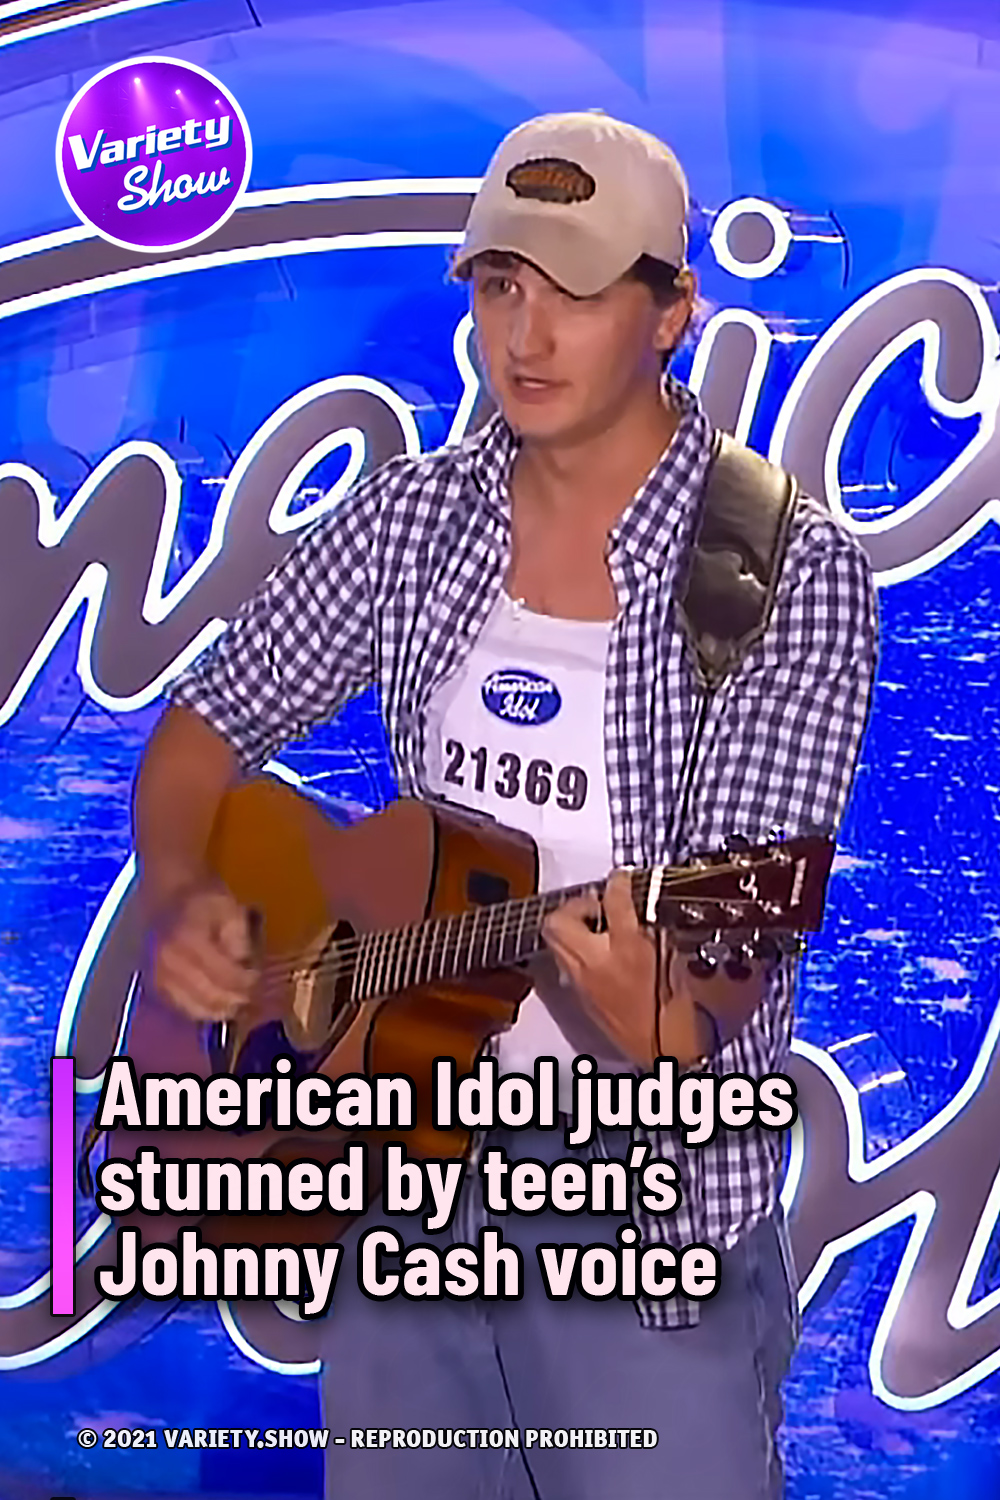 American Idol judges stunned by teen’s Johnny Cash voice